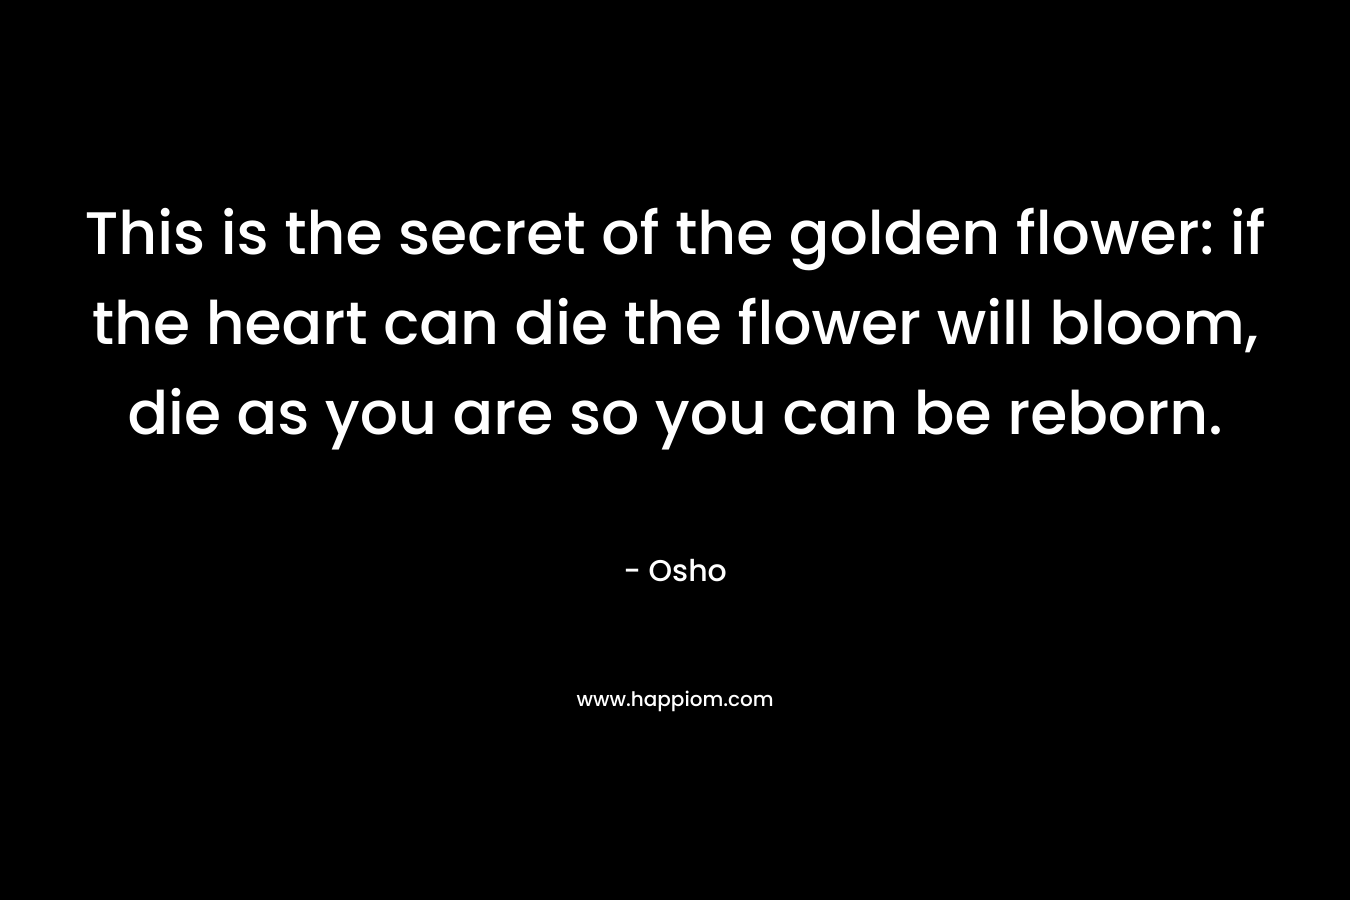 This is the secret of the golden flower: if the heart can die the flower will bloom, die as you are so you can be reborn.